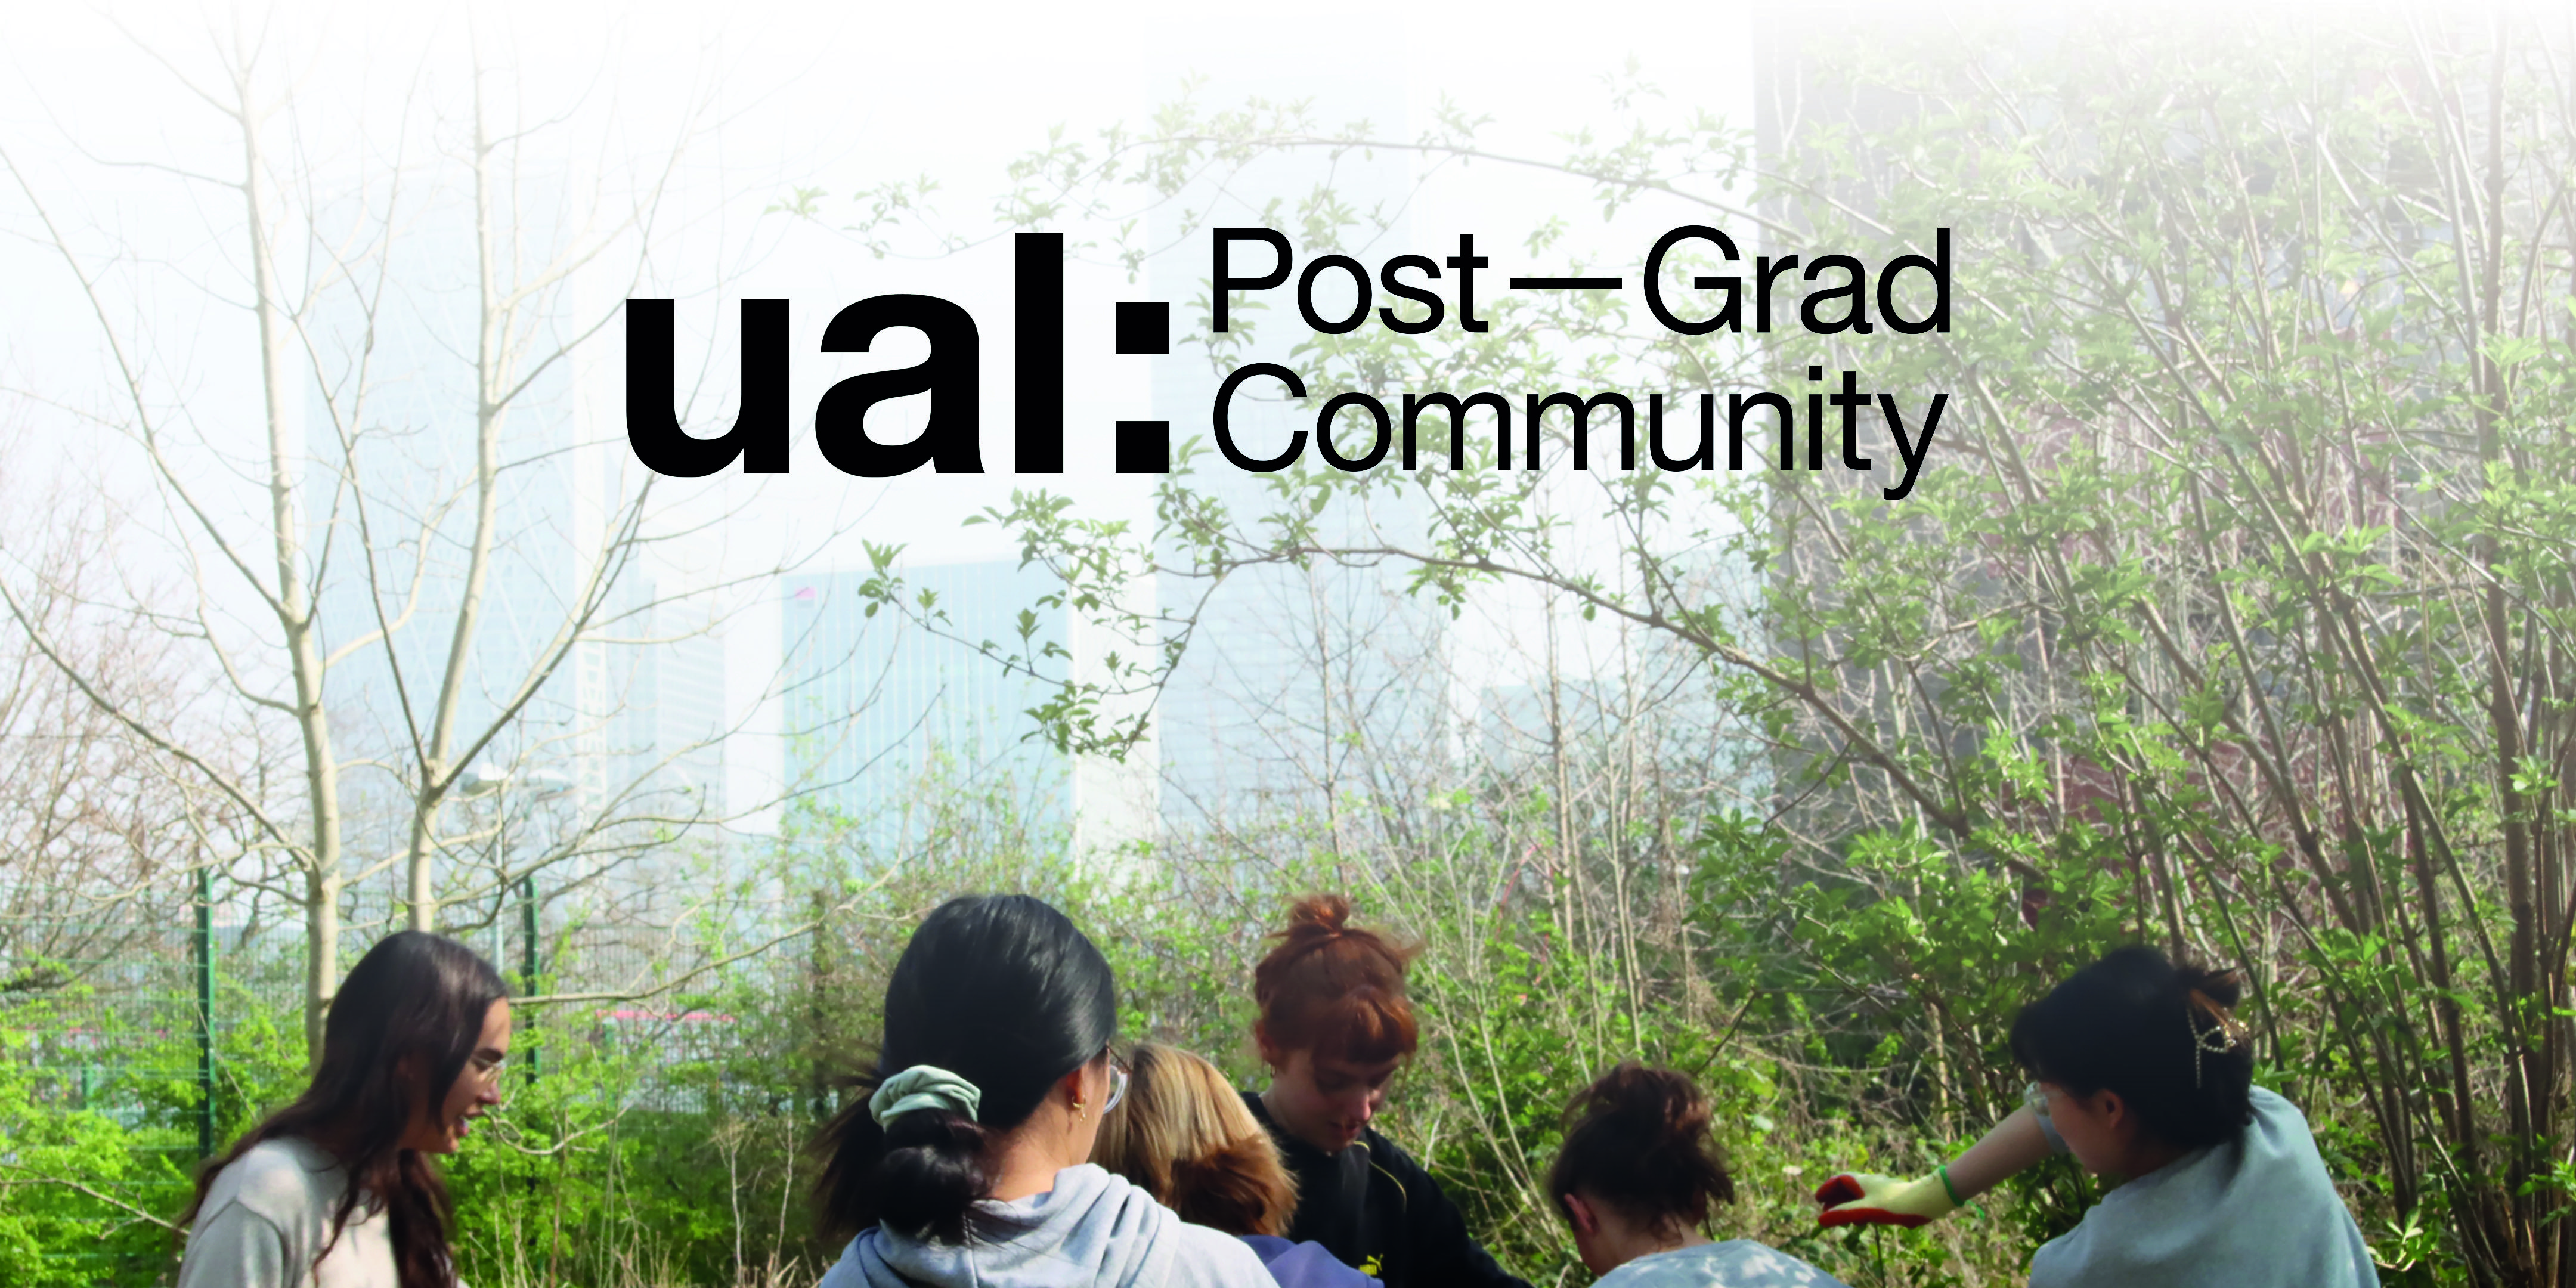 Post-Grad Interest Groups: How to get involved